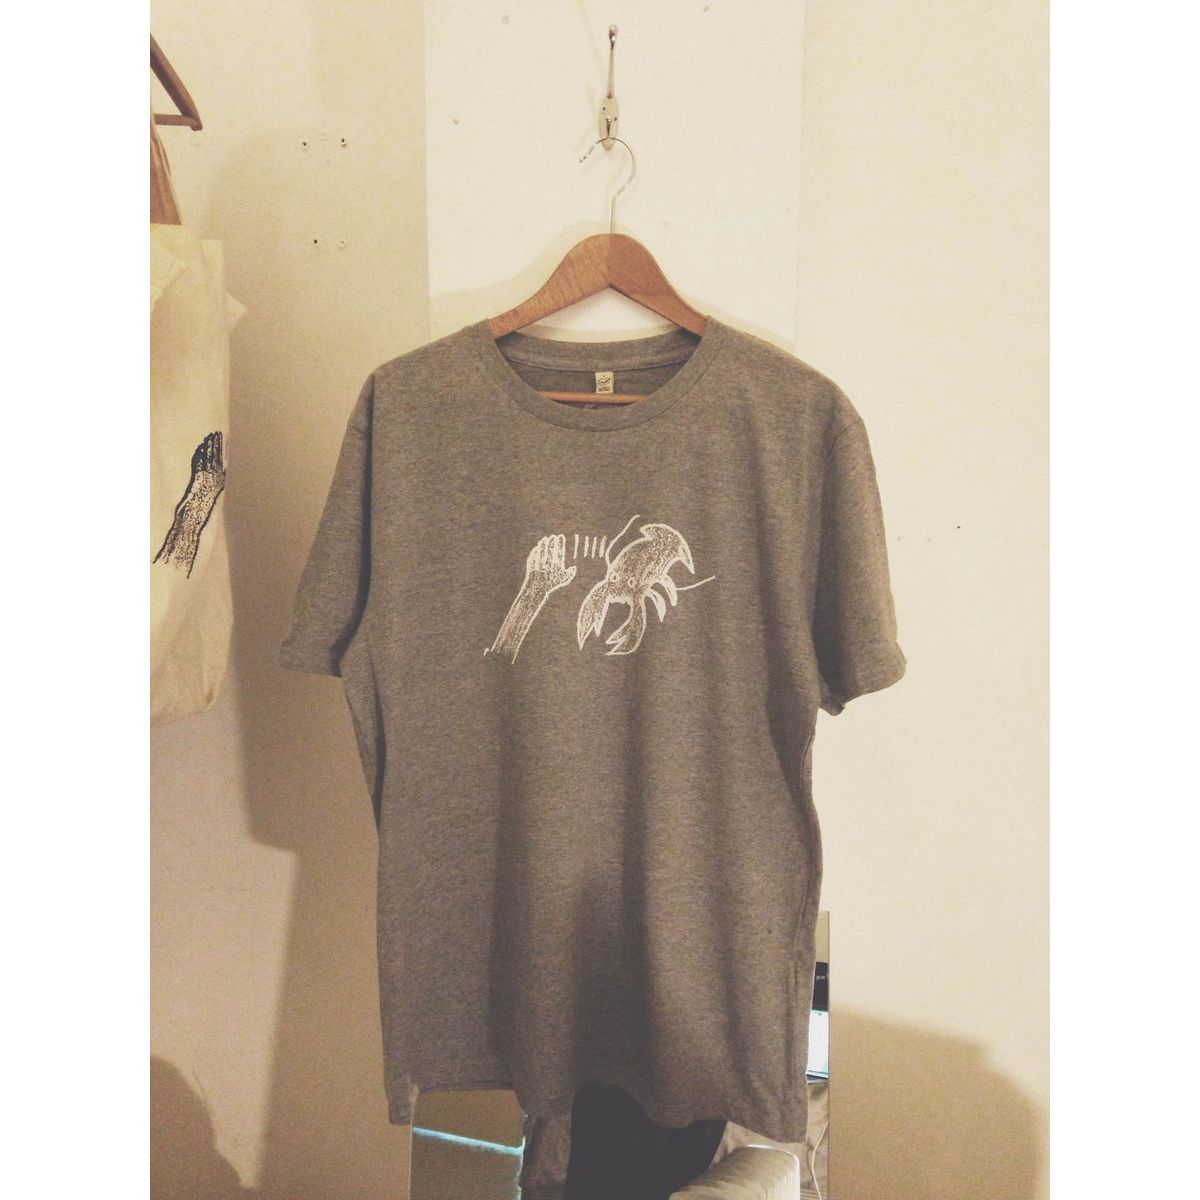 LOBSTER THEREMIN / LOBSTER THEREMIN LOGO T-SHIRT GREY SIZE:L